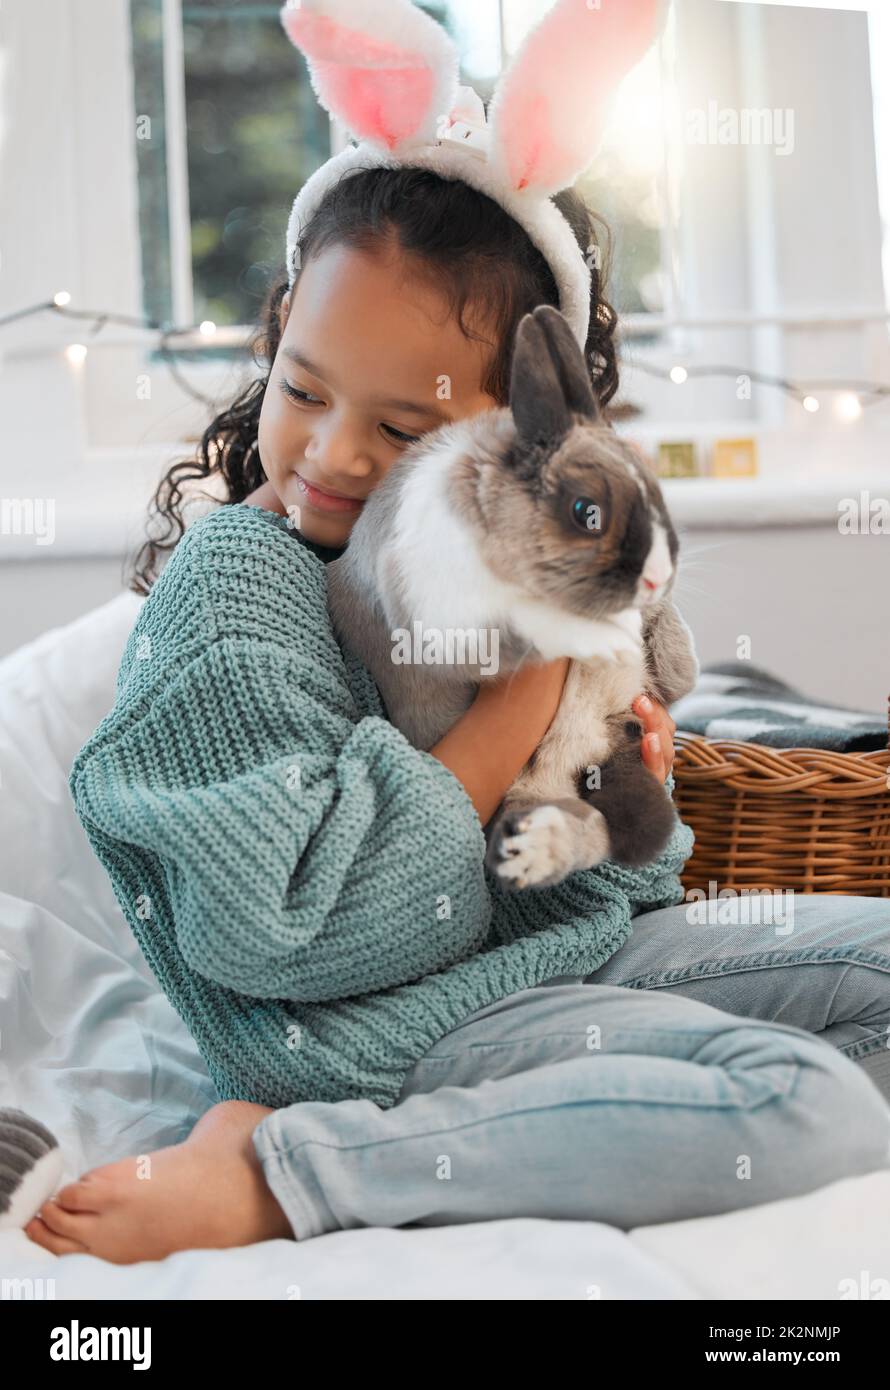 You are so loved. Shot of an adorable little girl bonding with her pet rabbit at home. Stock Photo